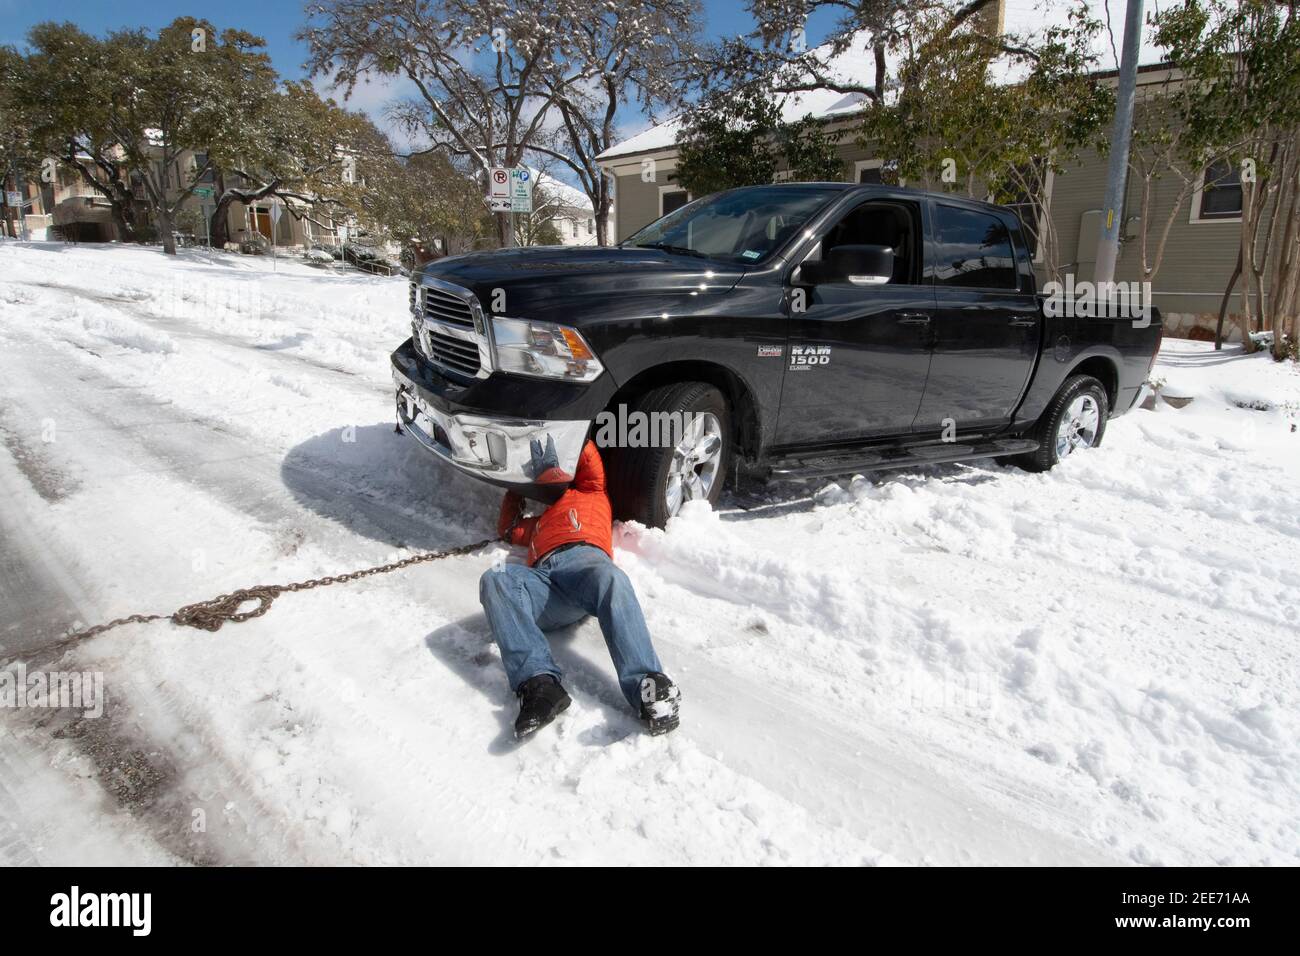 Austin, TX Feb 15, 2021: A motorist whose truck got stuck in the snow tries to hook a chain to it in downtown Austin after a rare snowstorm dumped more than six inches of snow overnight in central Texas. Roads throughout the city were impassable for most vehicles without four-wheel drive capabilities. Credit: Bob Daemmrich/Alamy Live News Stock Photo